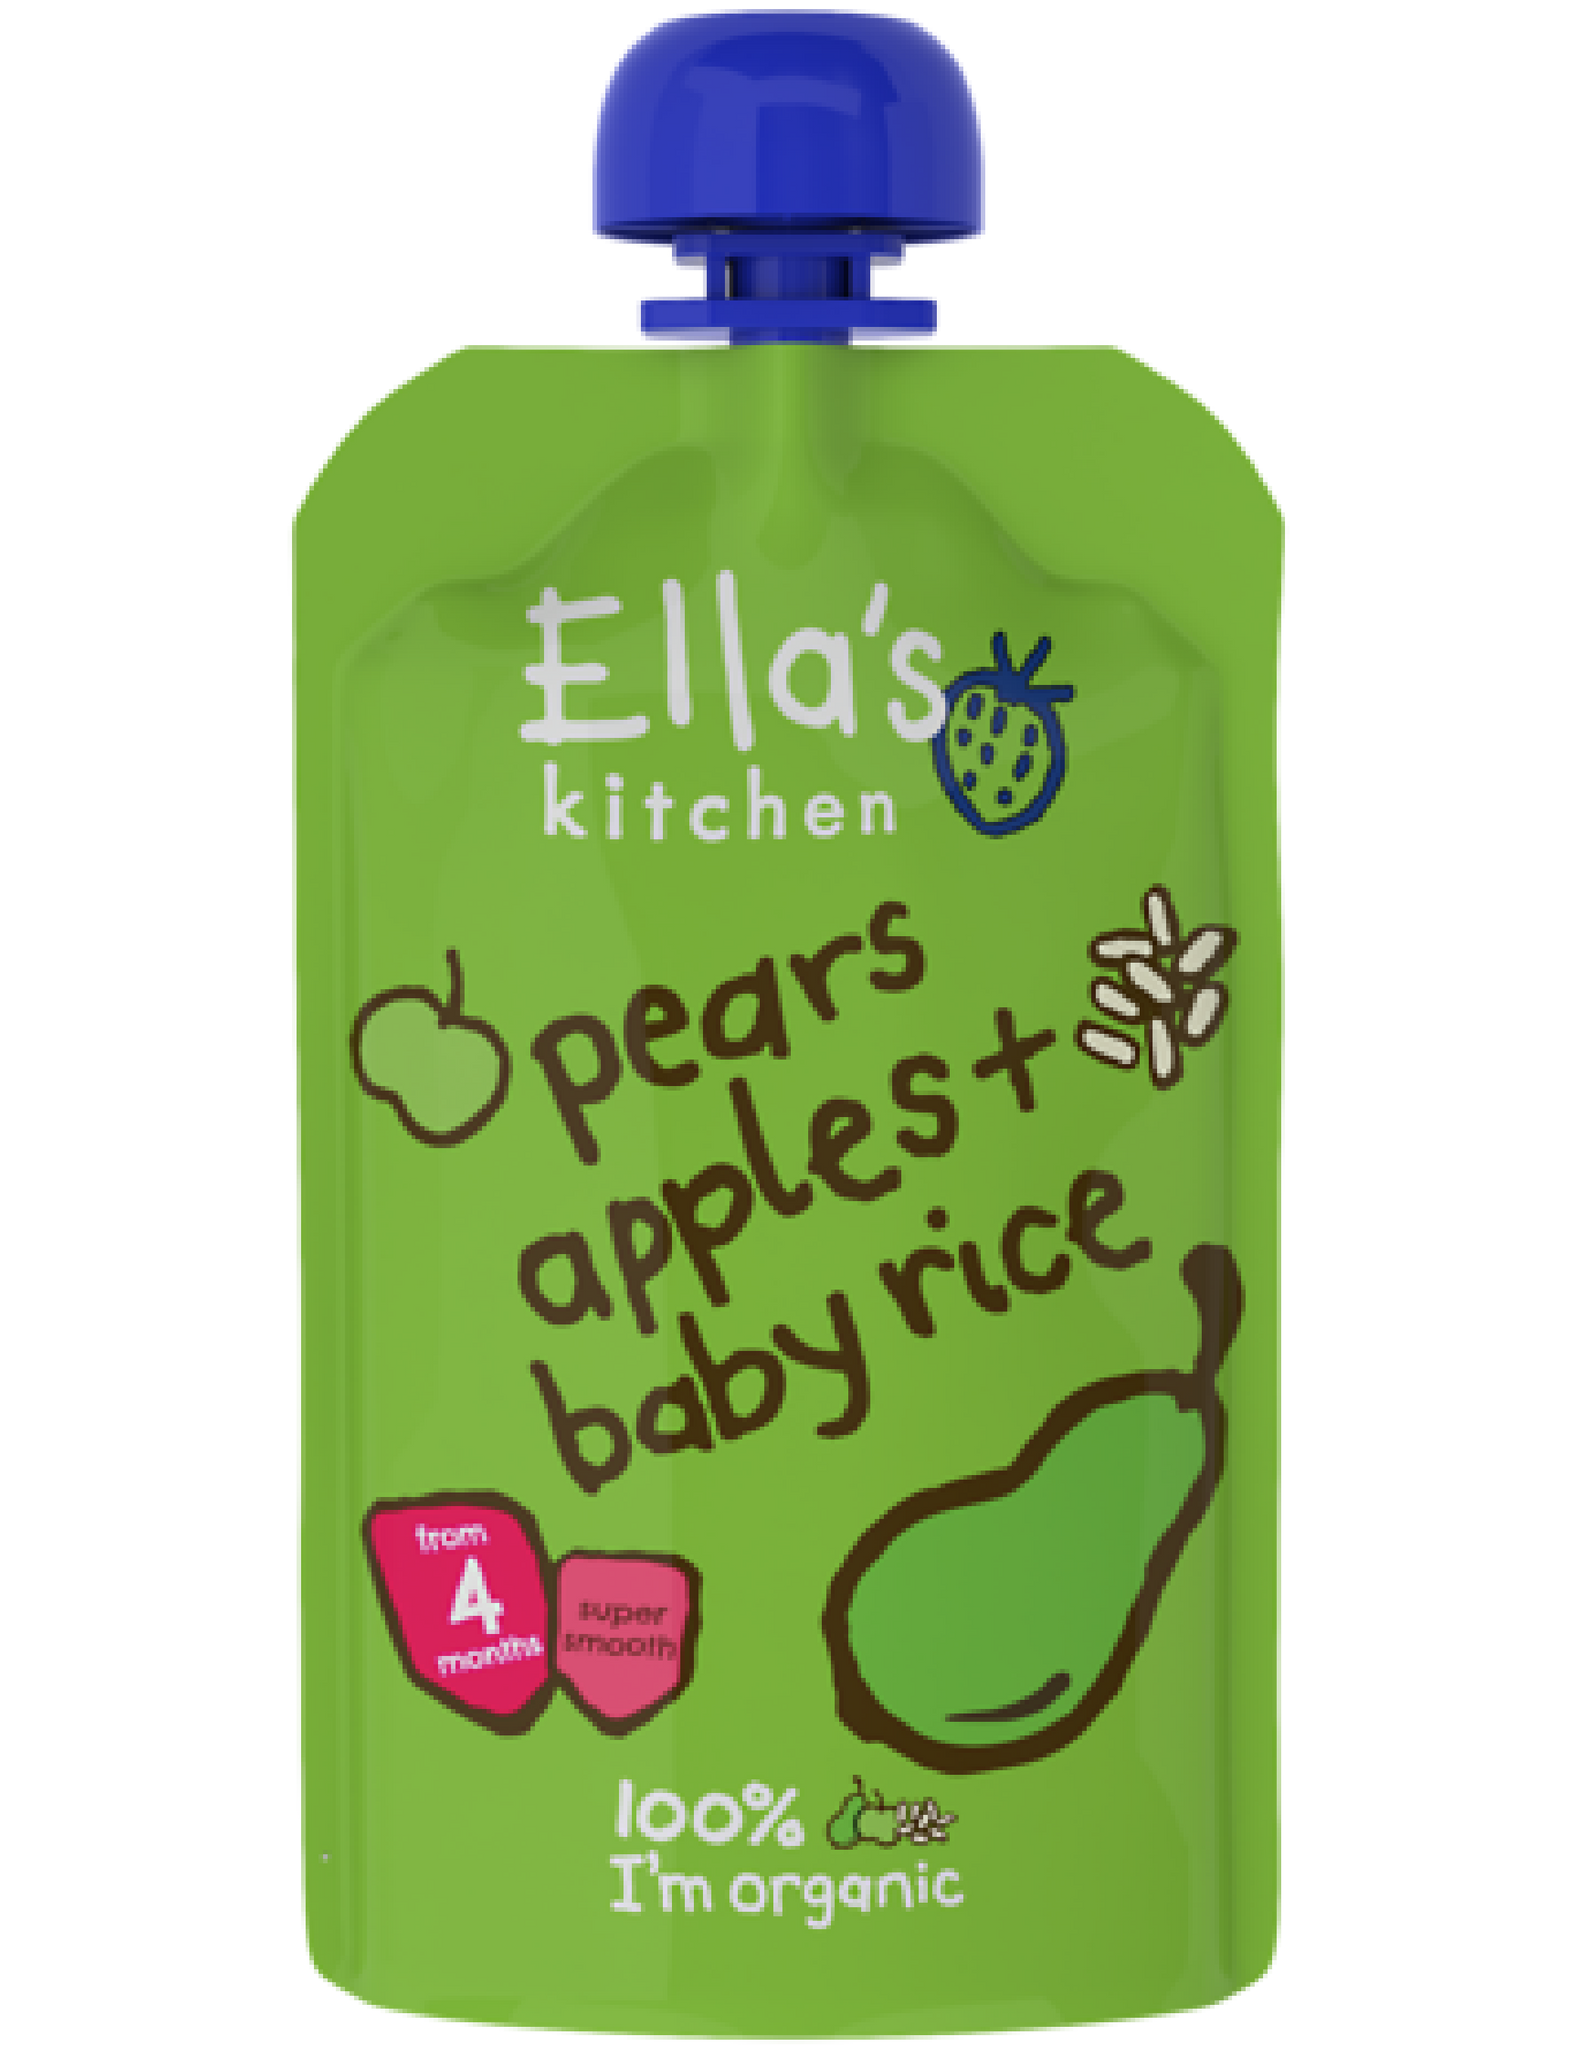 pears apples + baby rice - 7 x 120 g